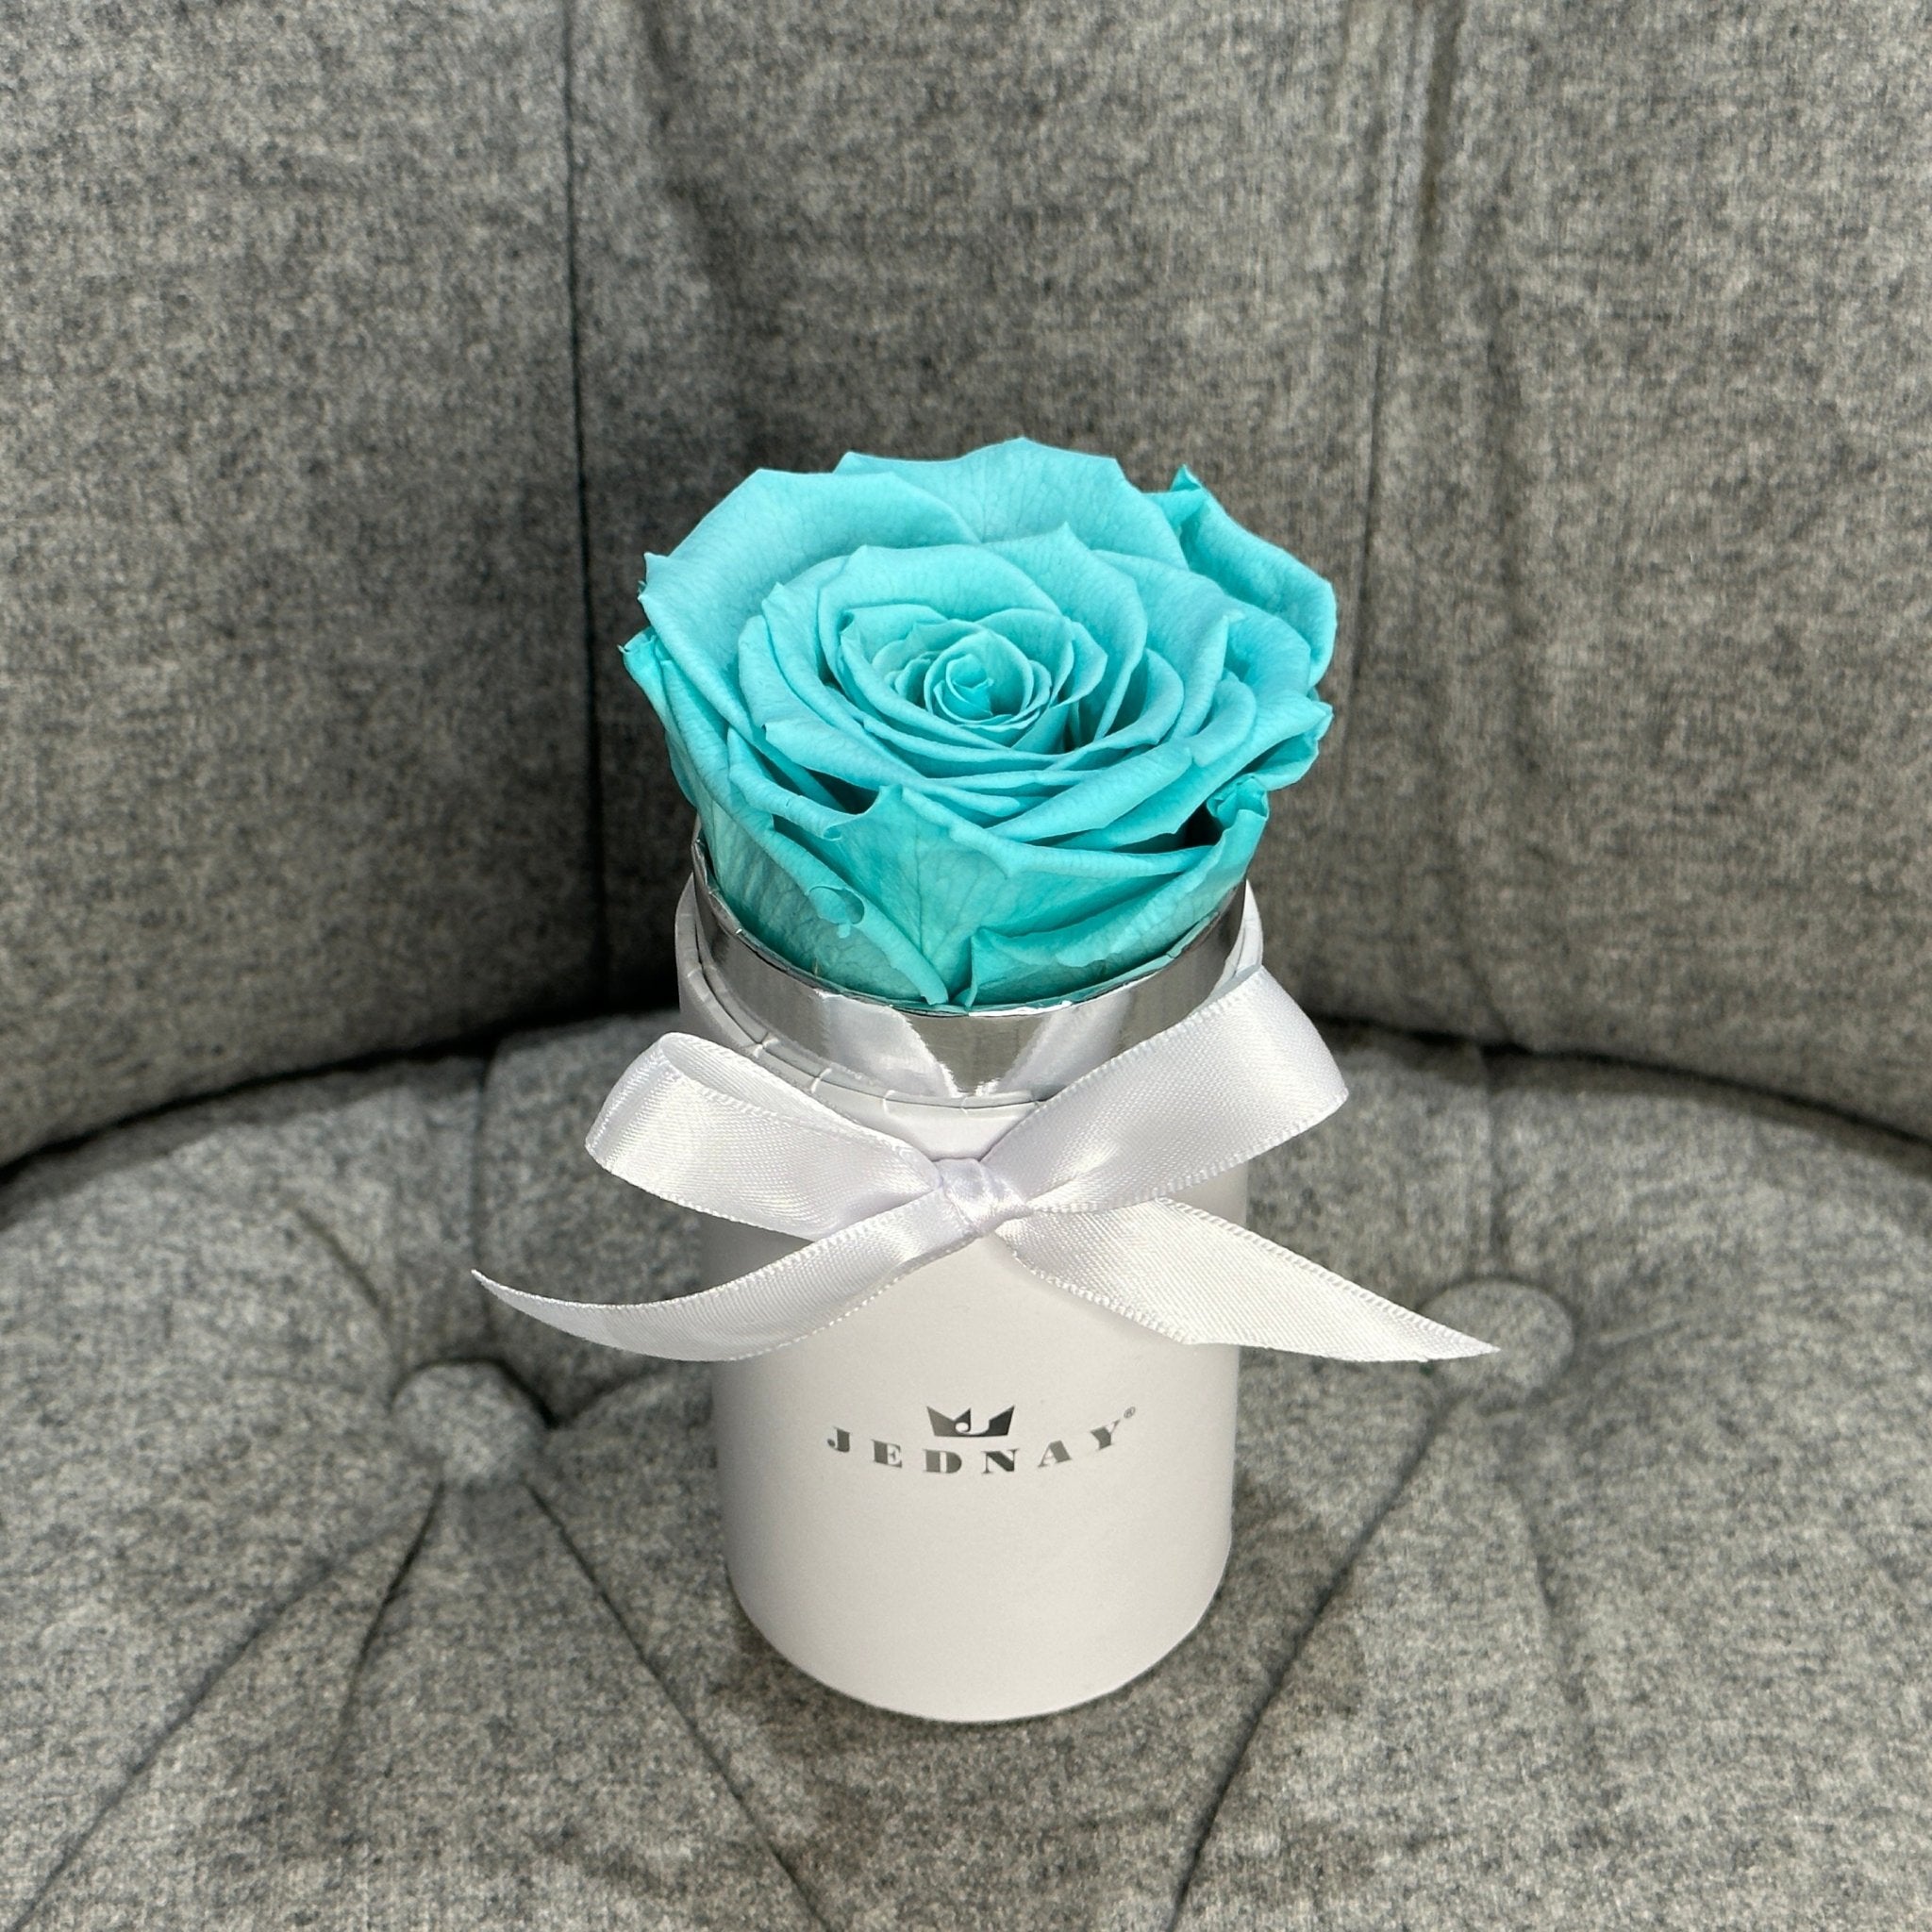 The Uno - Tiffany Blue Eternal Rose - Classic White Box - Jednay Roses